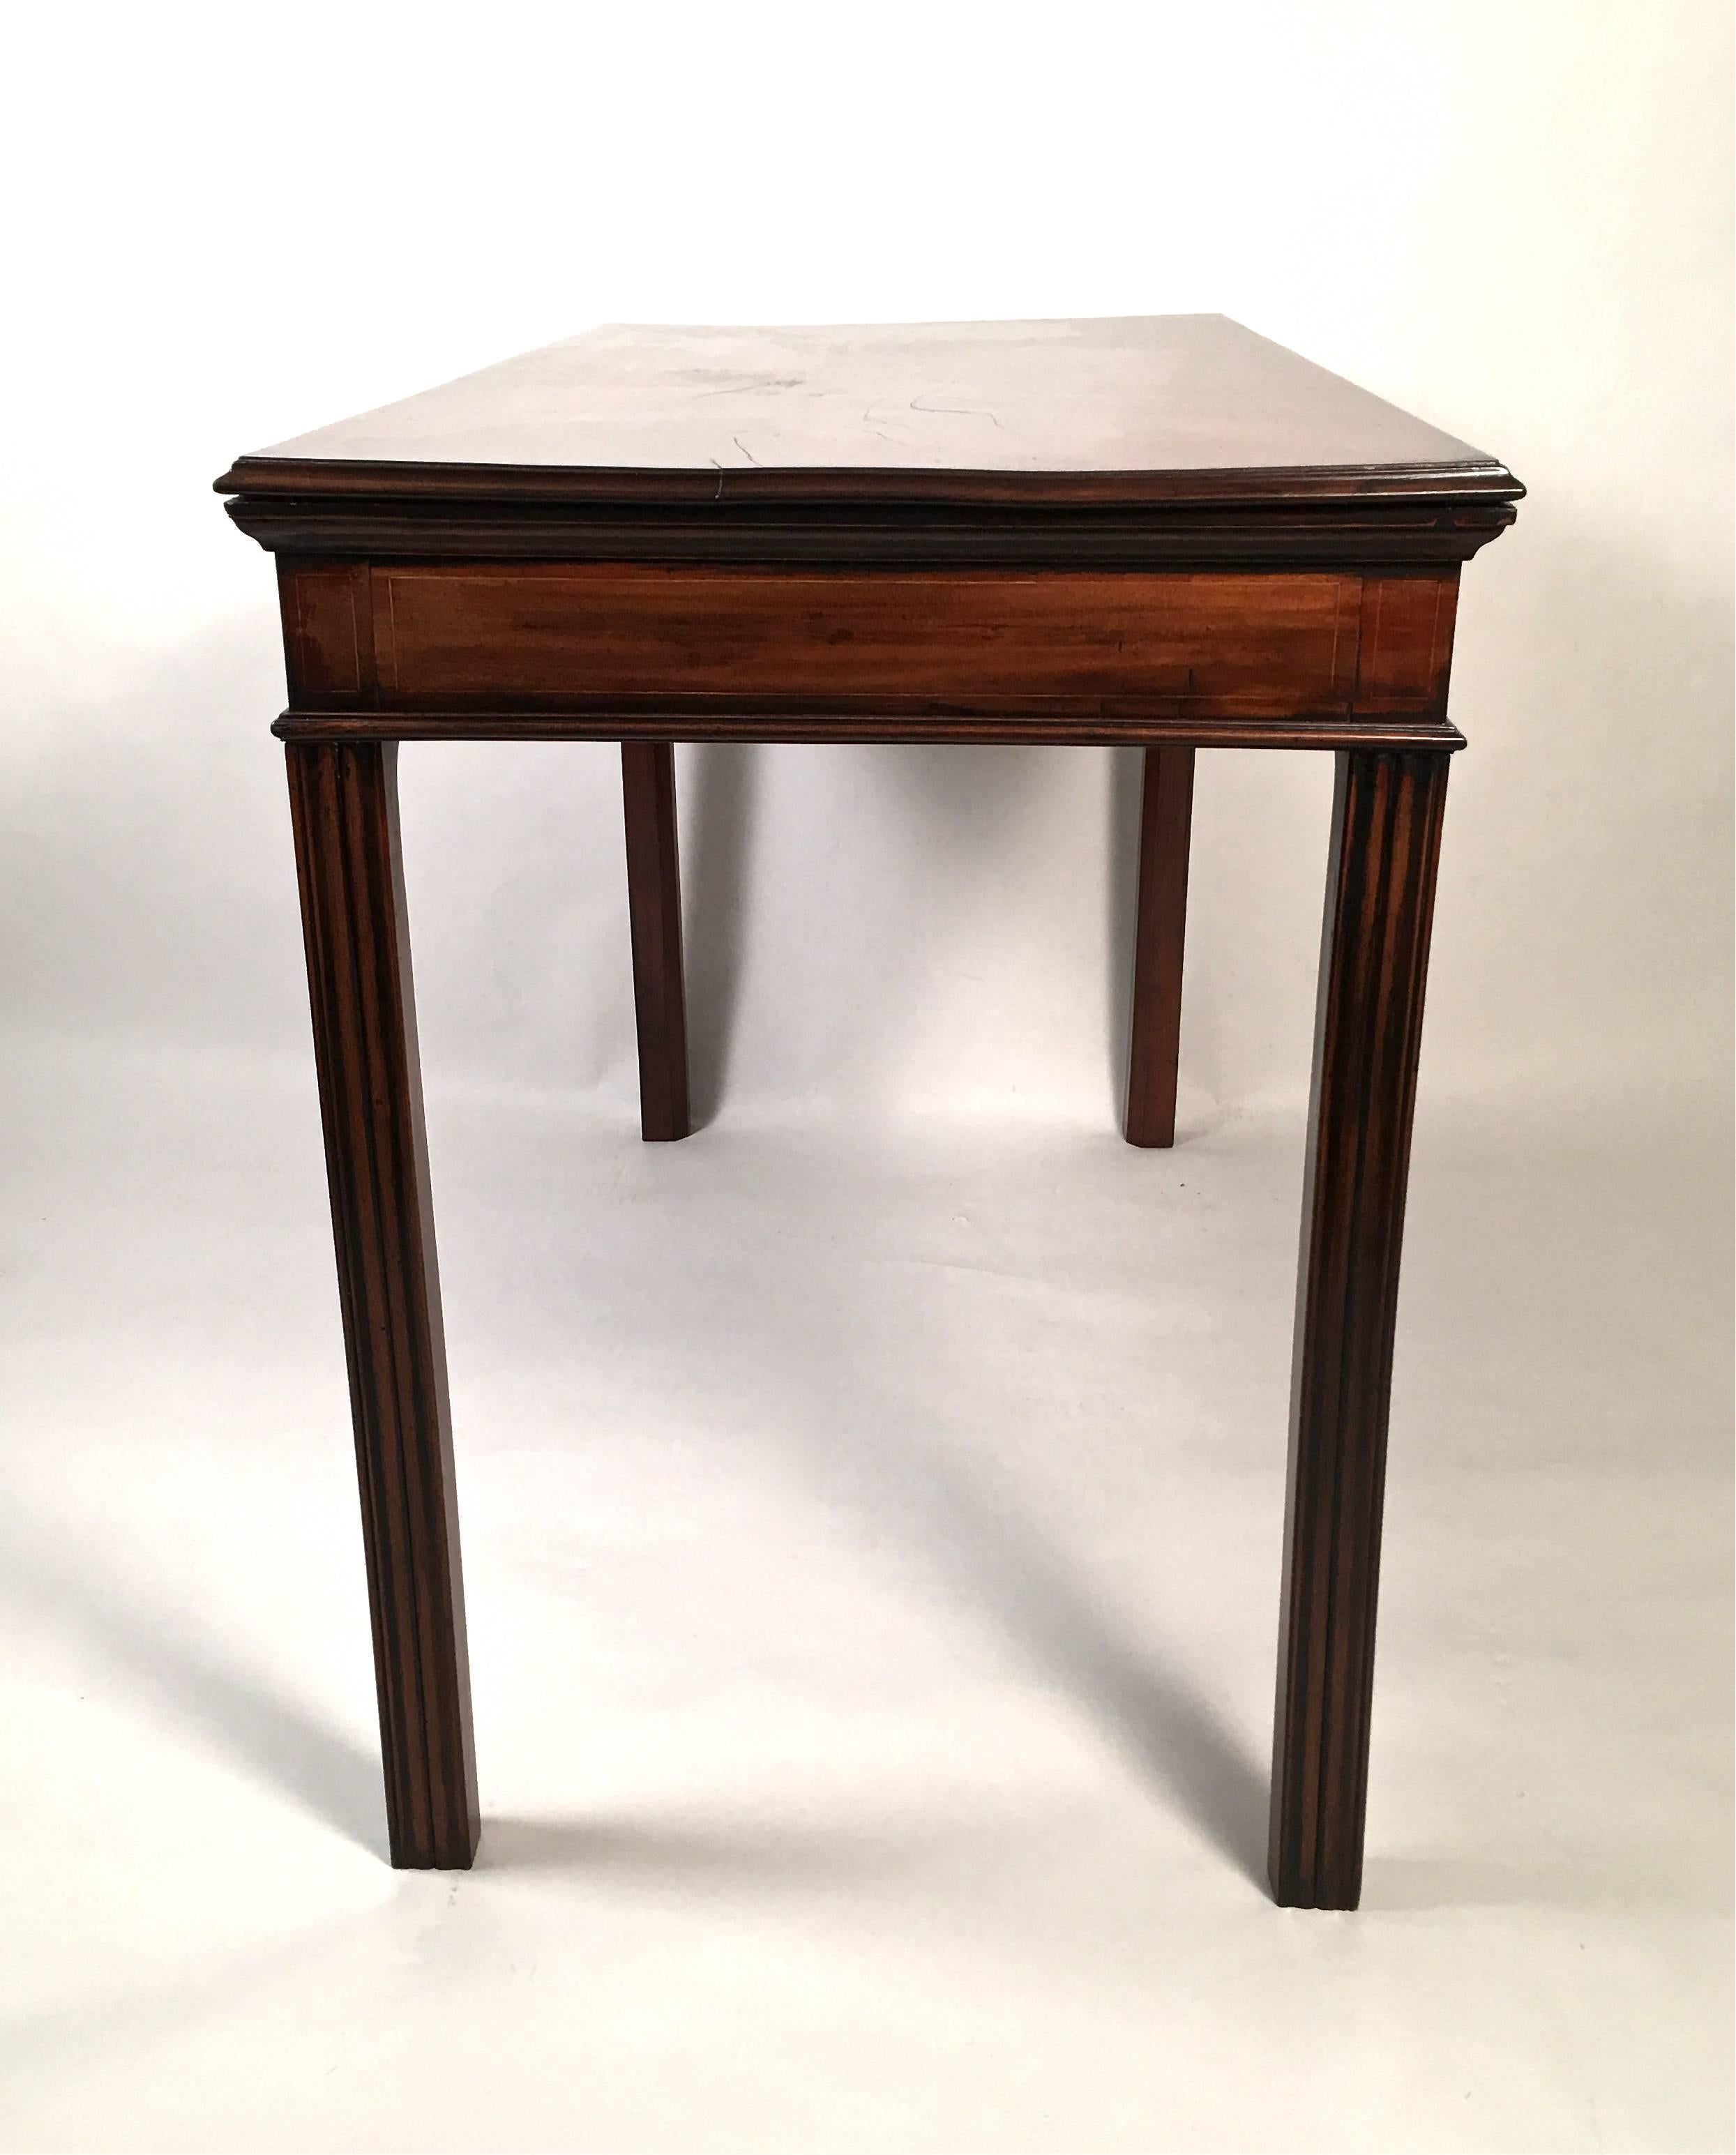 A well proportioned George III period serving or console table in mahogany, the beautifully figured rectangular top over the frieze and sides, all of which are  inlaid with boxwood rectangular stringing, raised on four square fluted legs, English